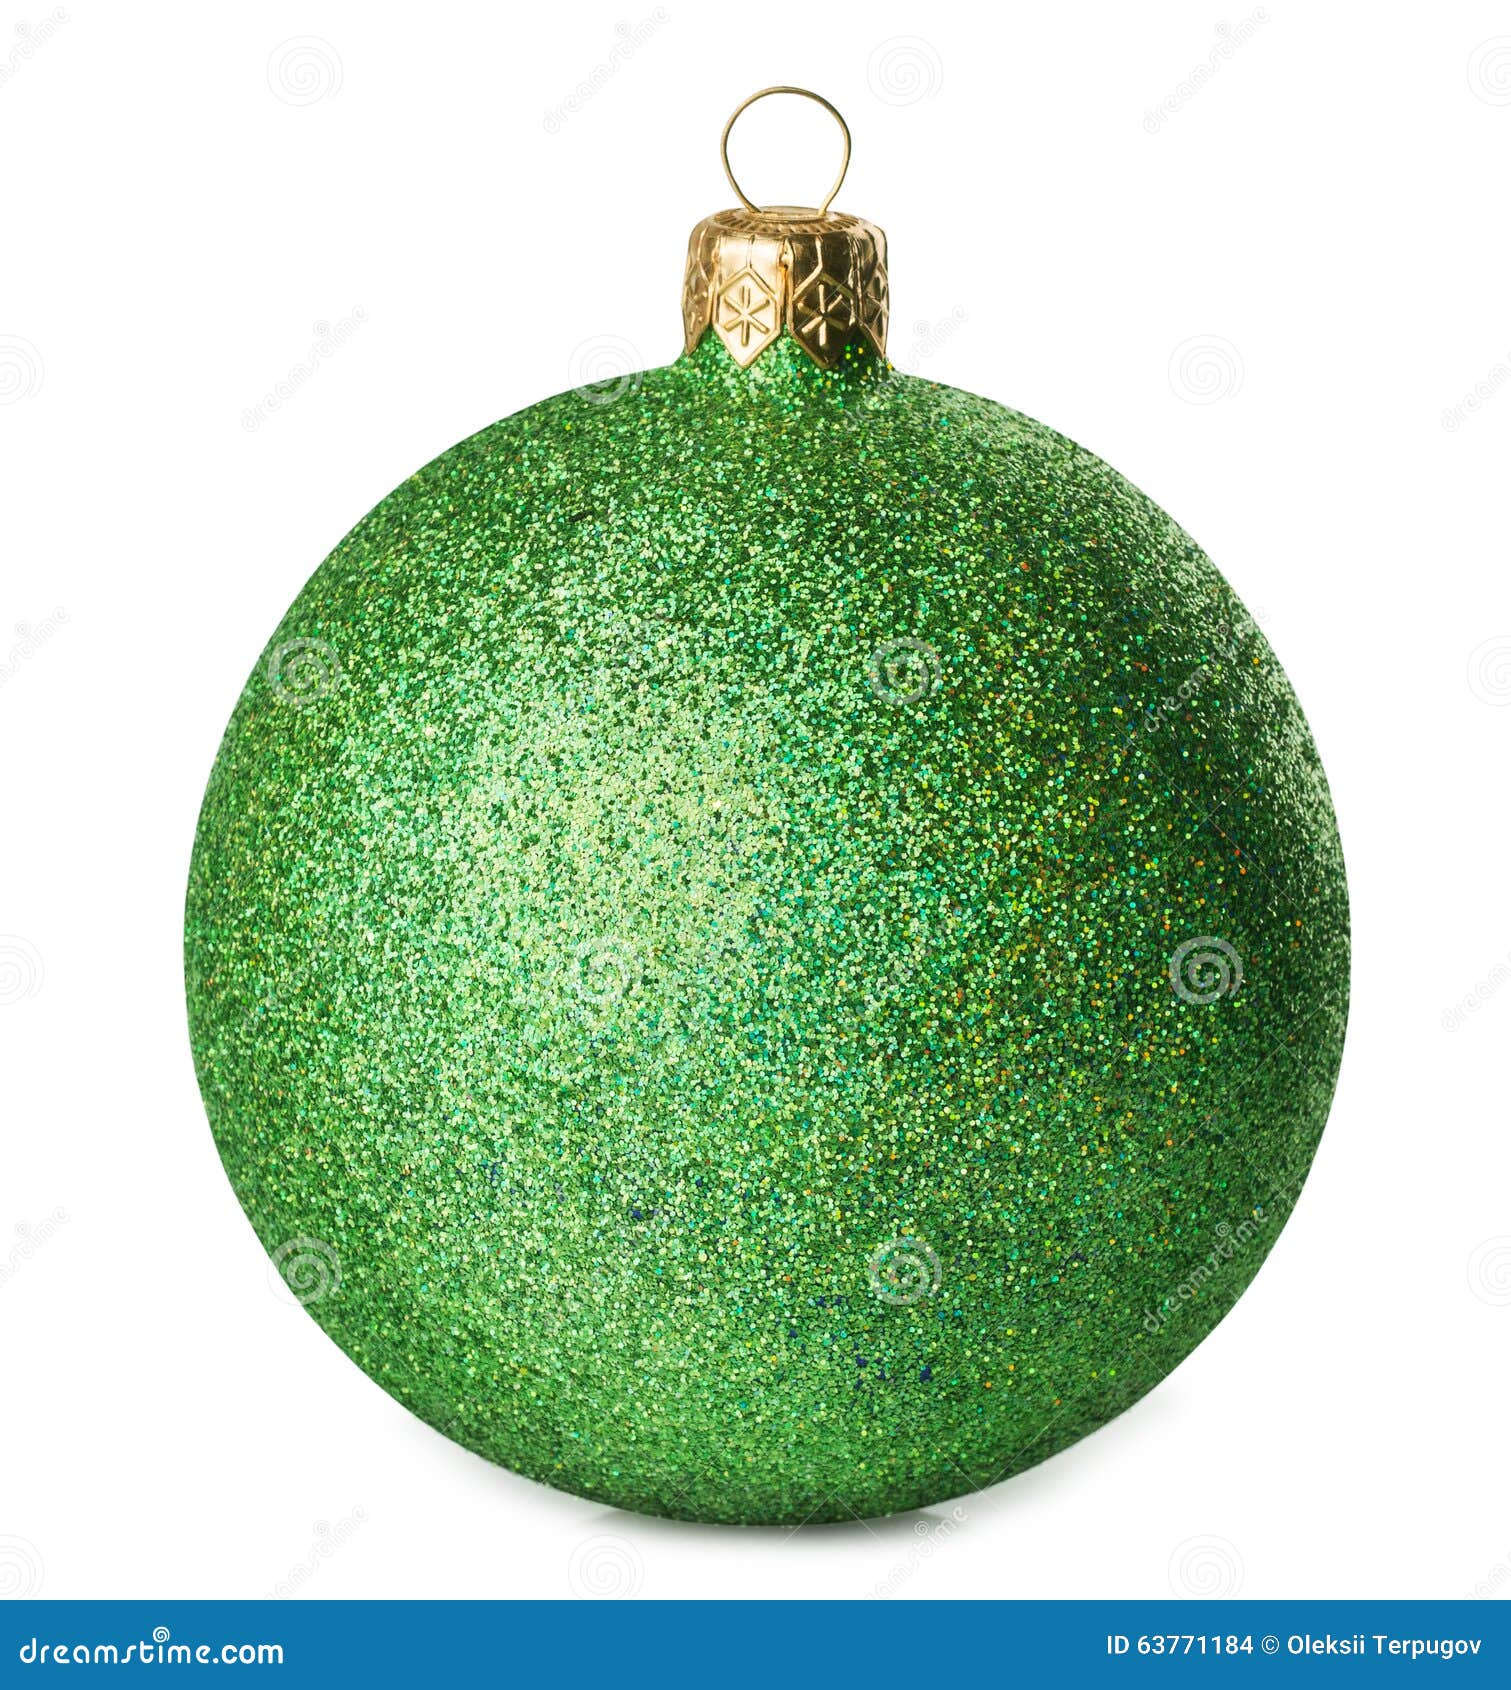 Green Christmas Ball Isolated on White Background Stock Photo - Image ...